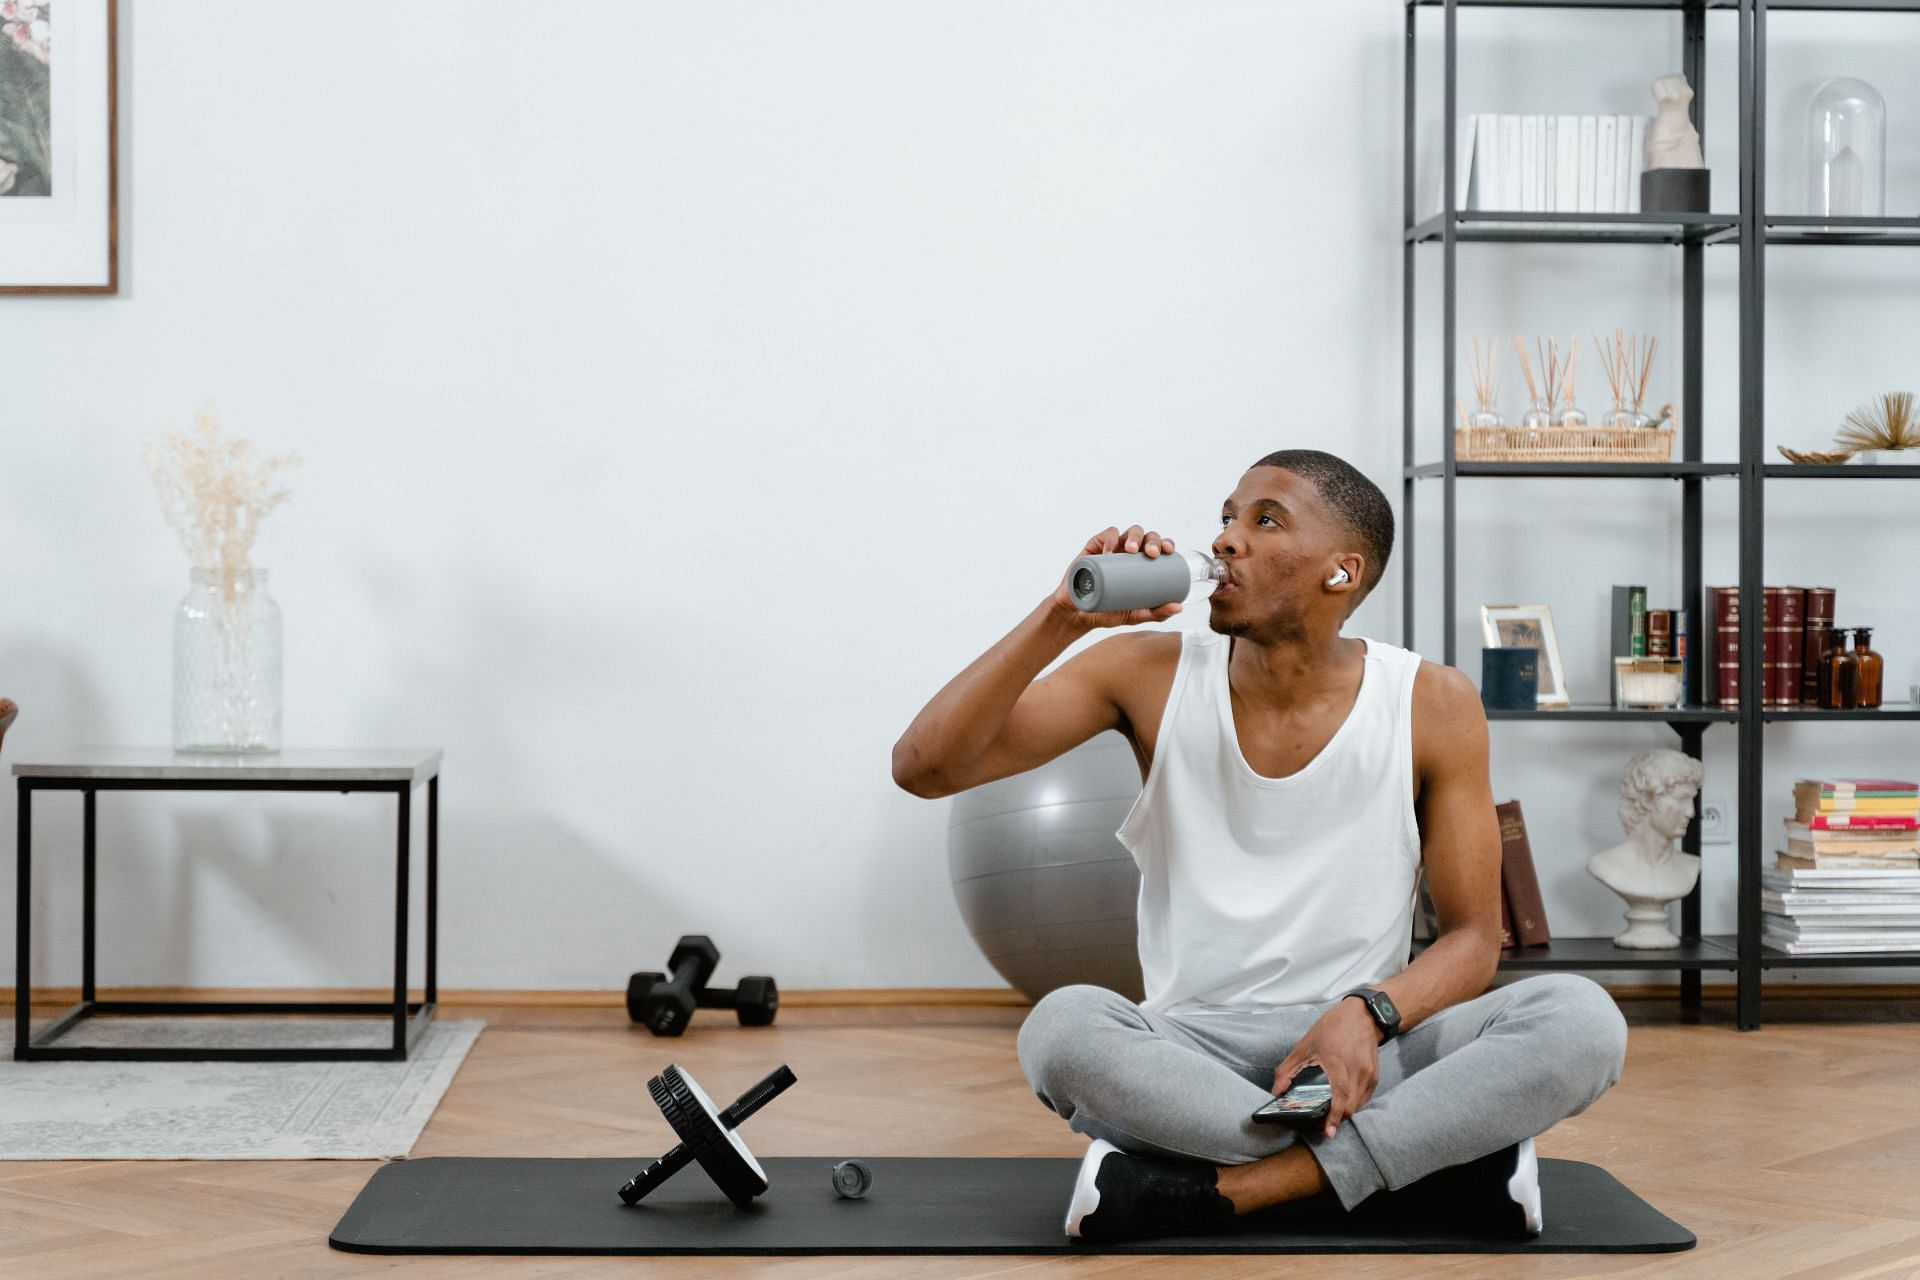 Caffeine, which is present in pre-workout, gives you greater energy and alertness for the gym. (Image via Pexels/Mart Production)